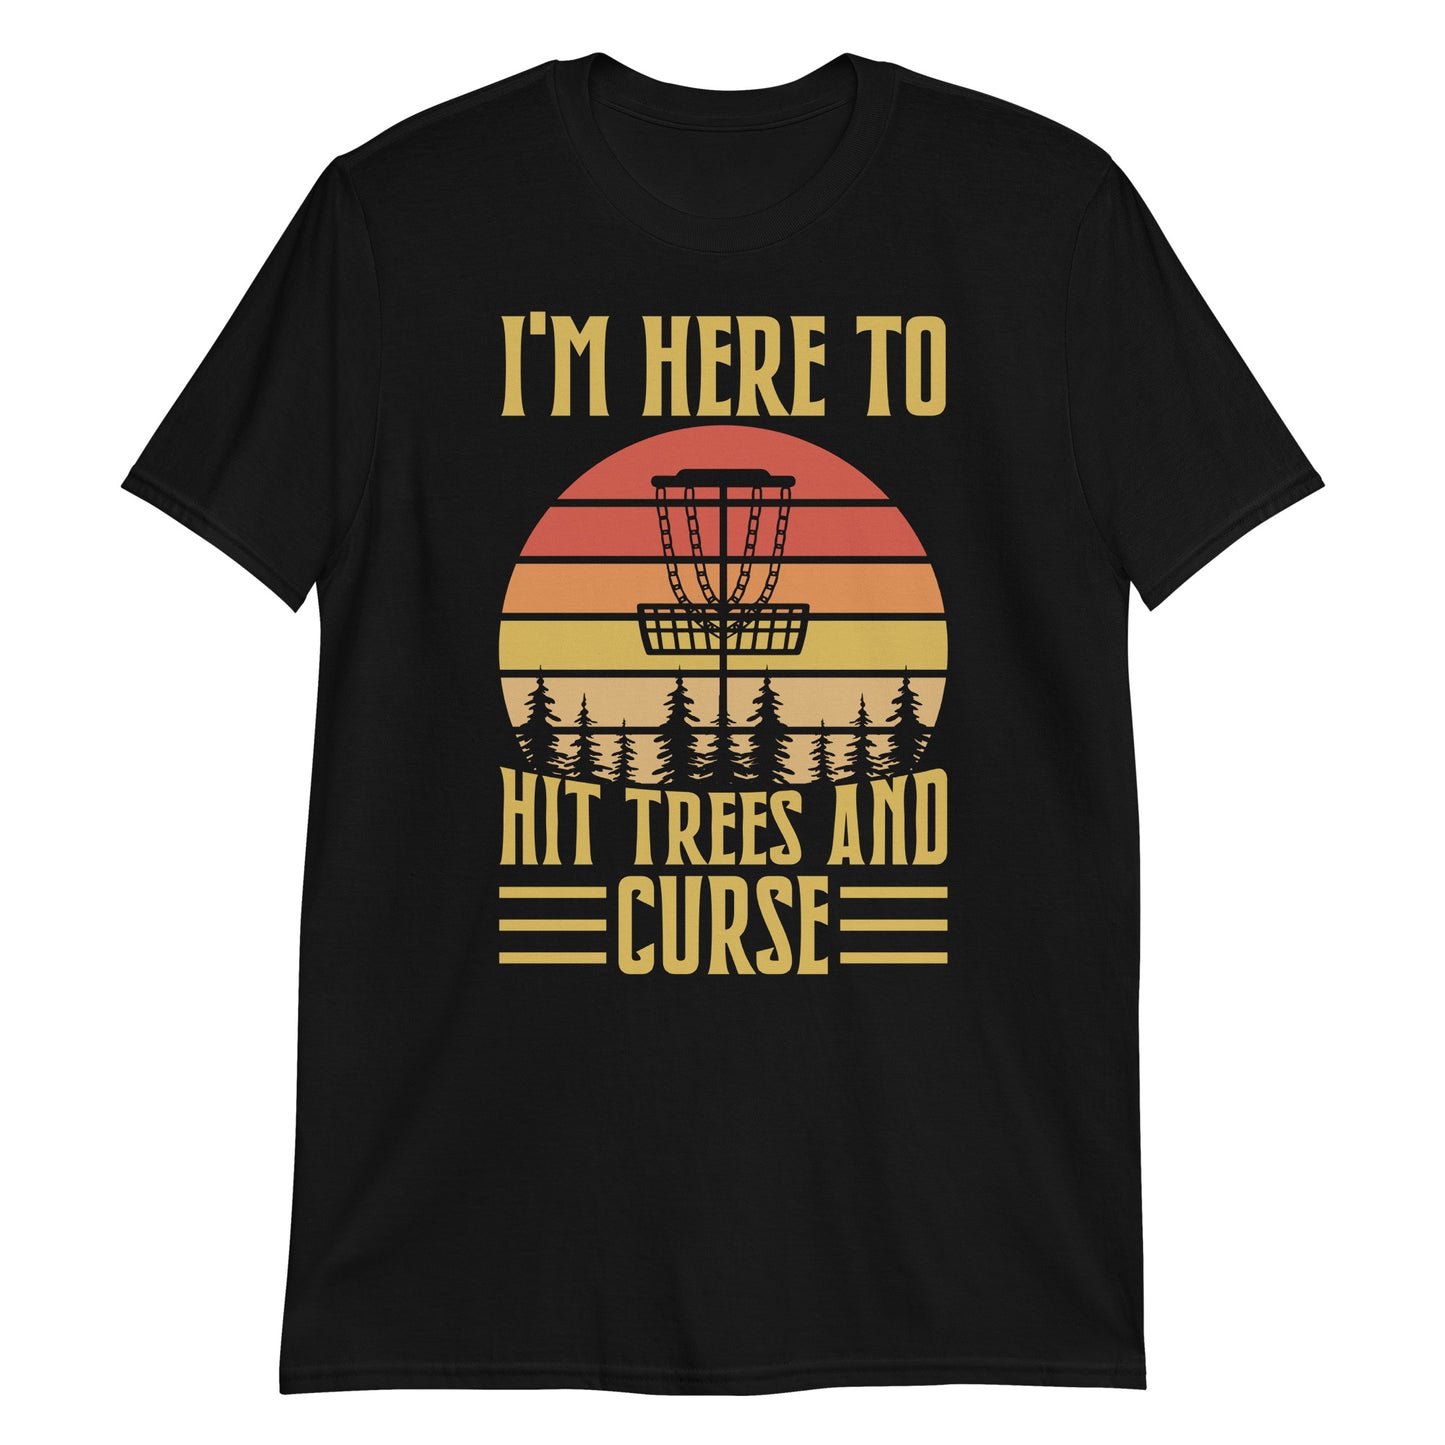 Disc Golf I'm Here To Hit Trees And Curse Tshirt | Disc Sport Shirt | Disc Golf Gifts | Disc Golf Unisex T-Shirt